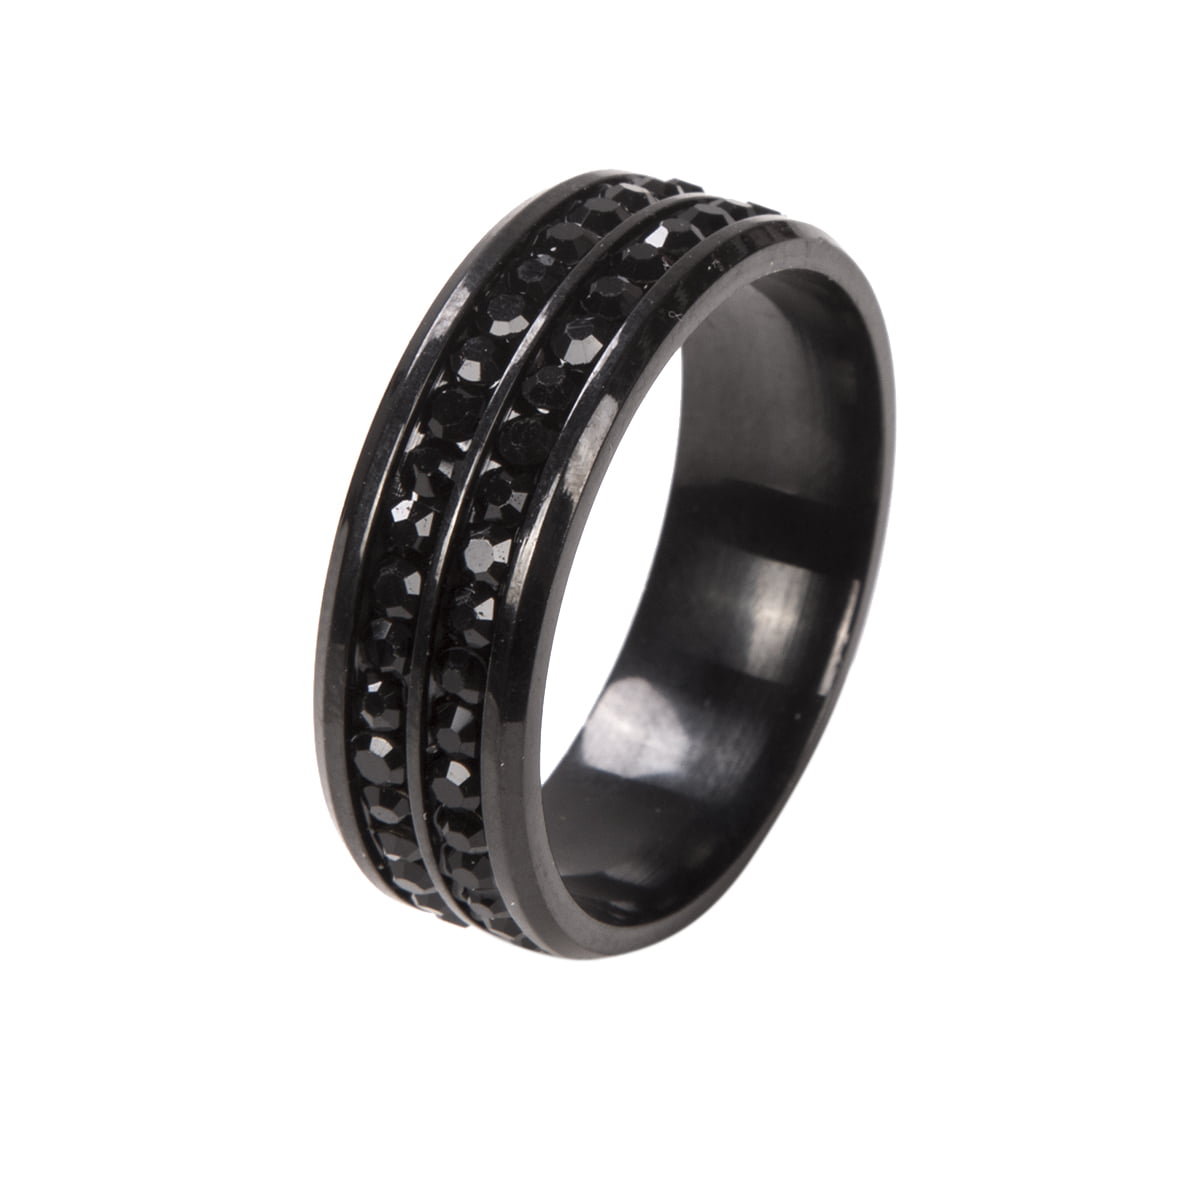 8mm Titanium Steel Rings Womens Mens Band Black /& Gold Fashion Jewelry Size 6-12